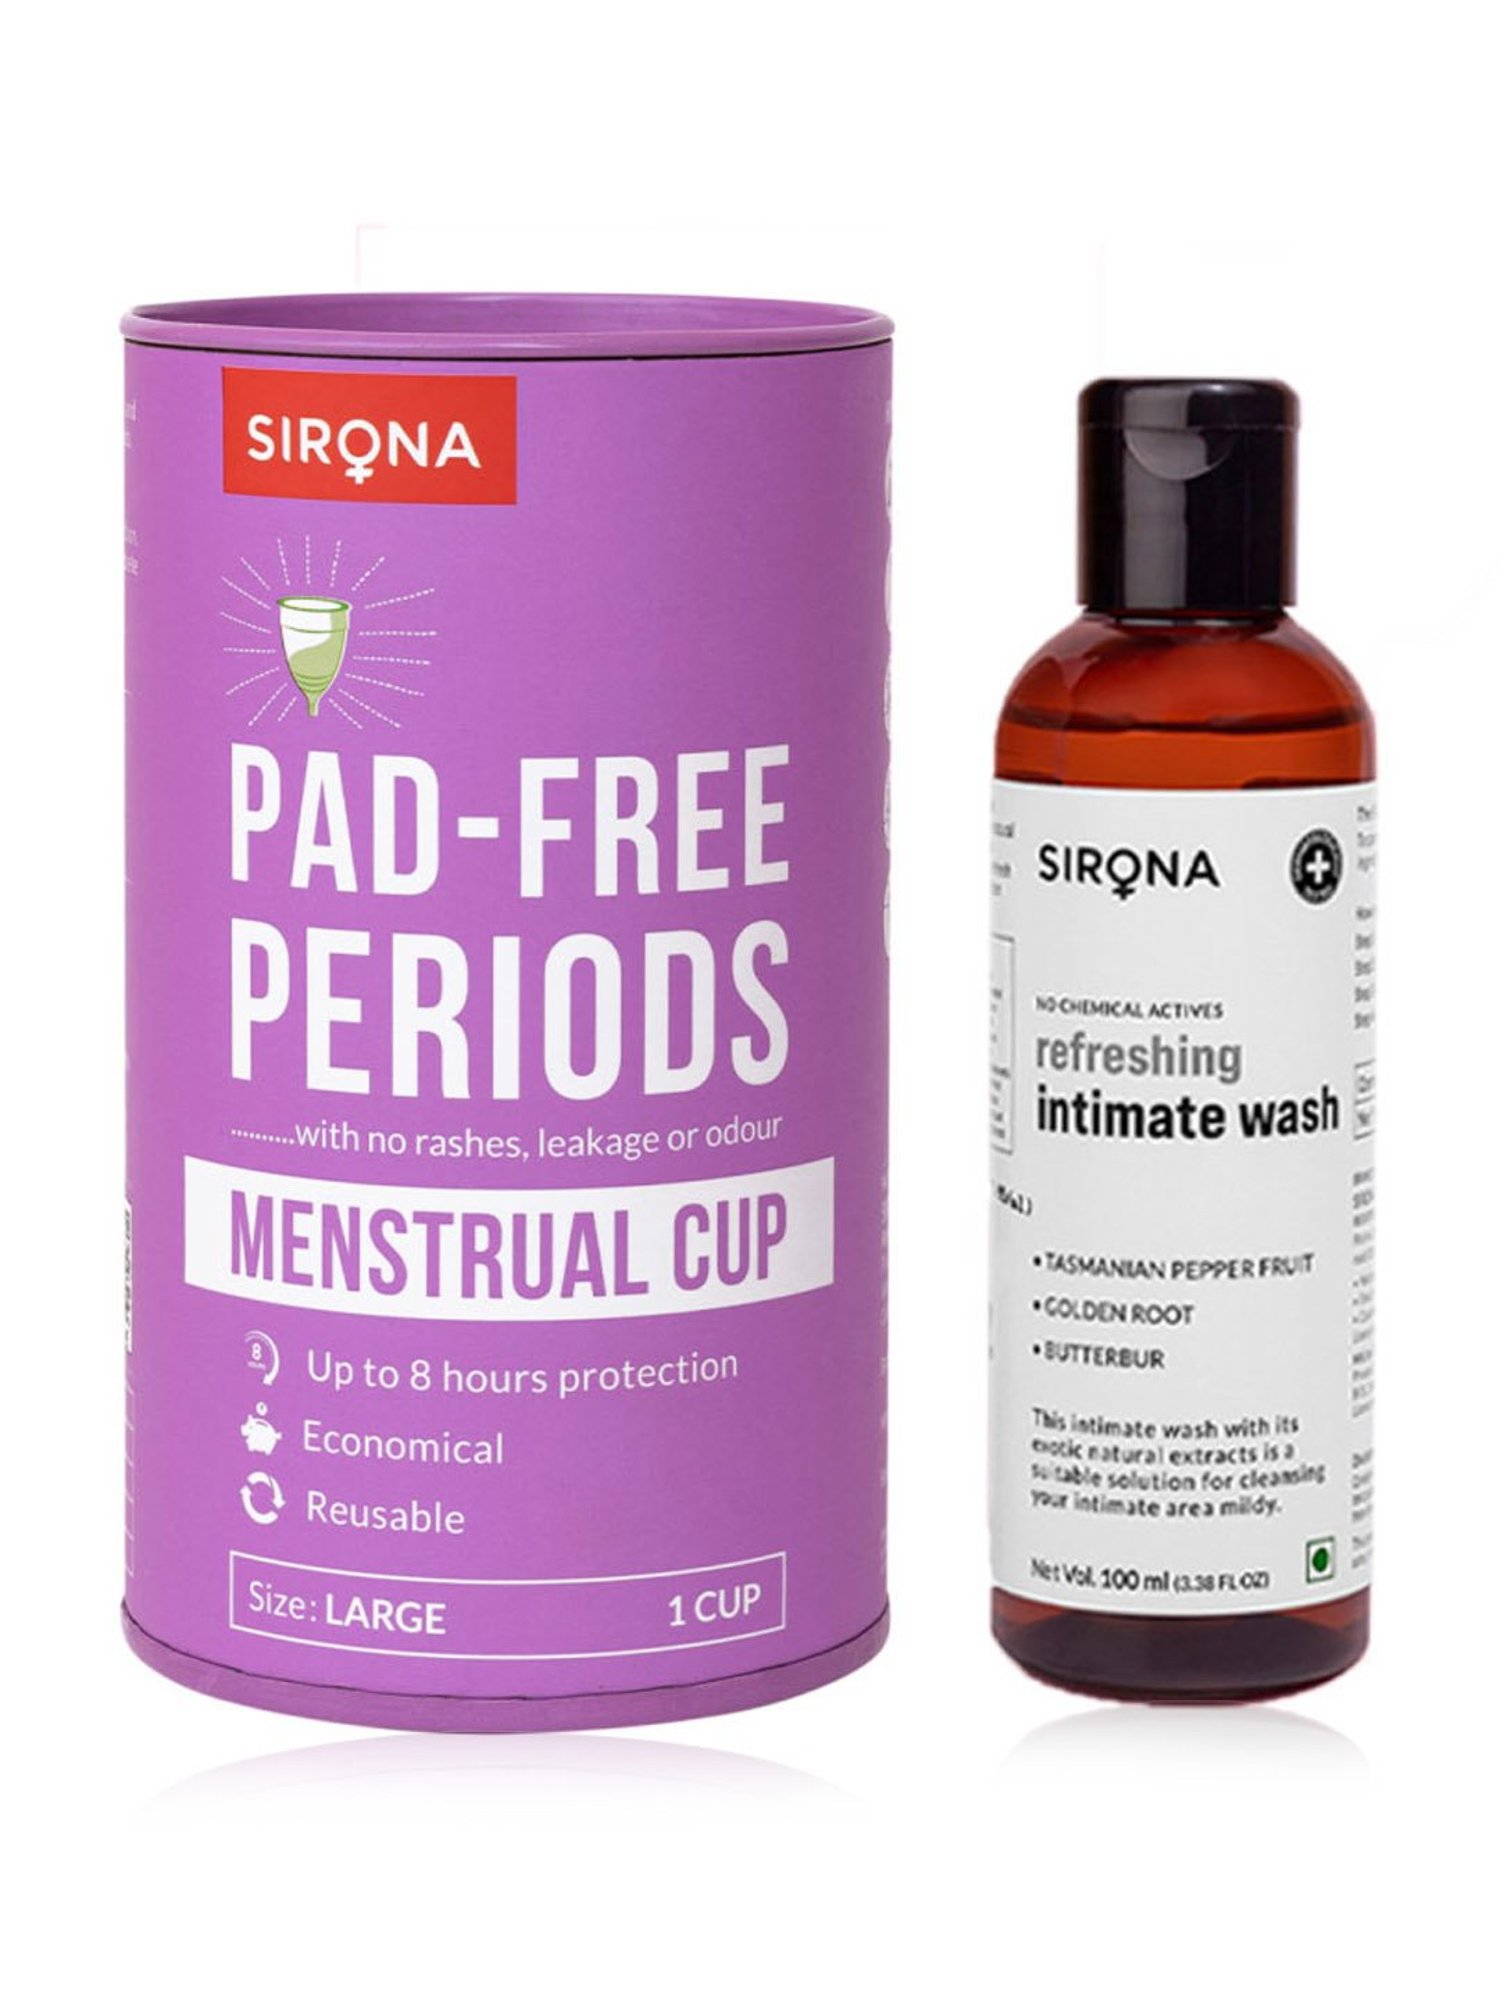 Buy Sirona Reusable Menstrual Cup (Medium ) with Pouch Online @ Best Price